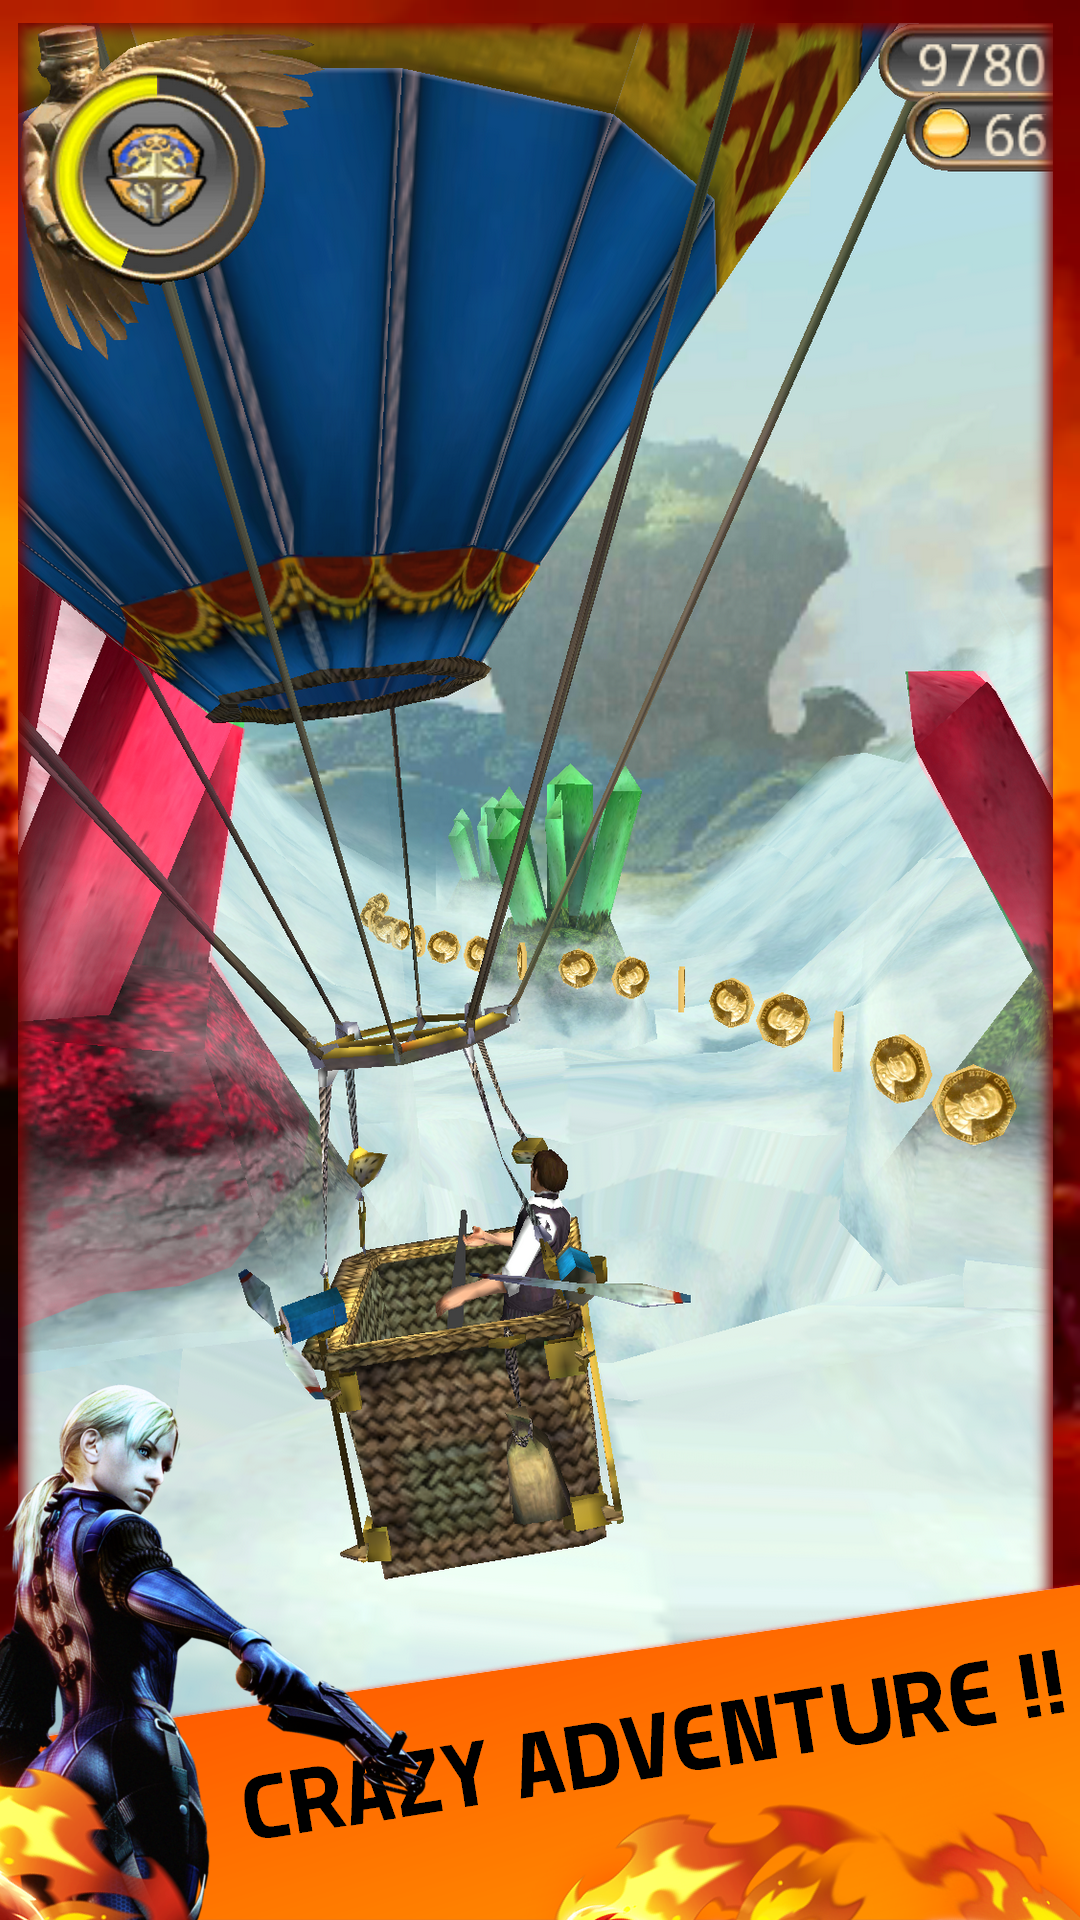 Oz The Great and Powerful - With the new Temple Run Oz update you